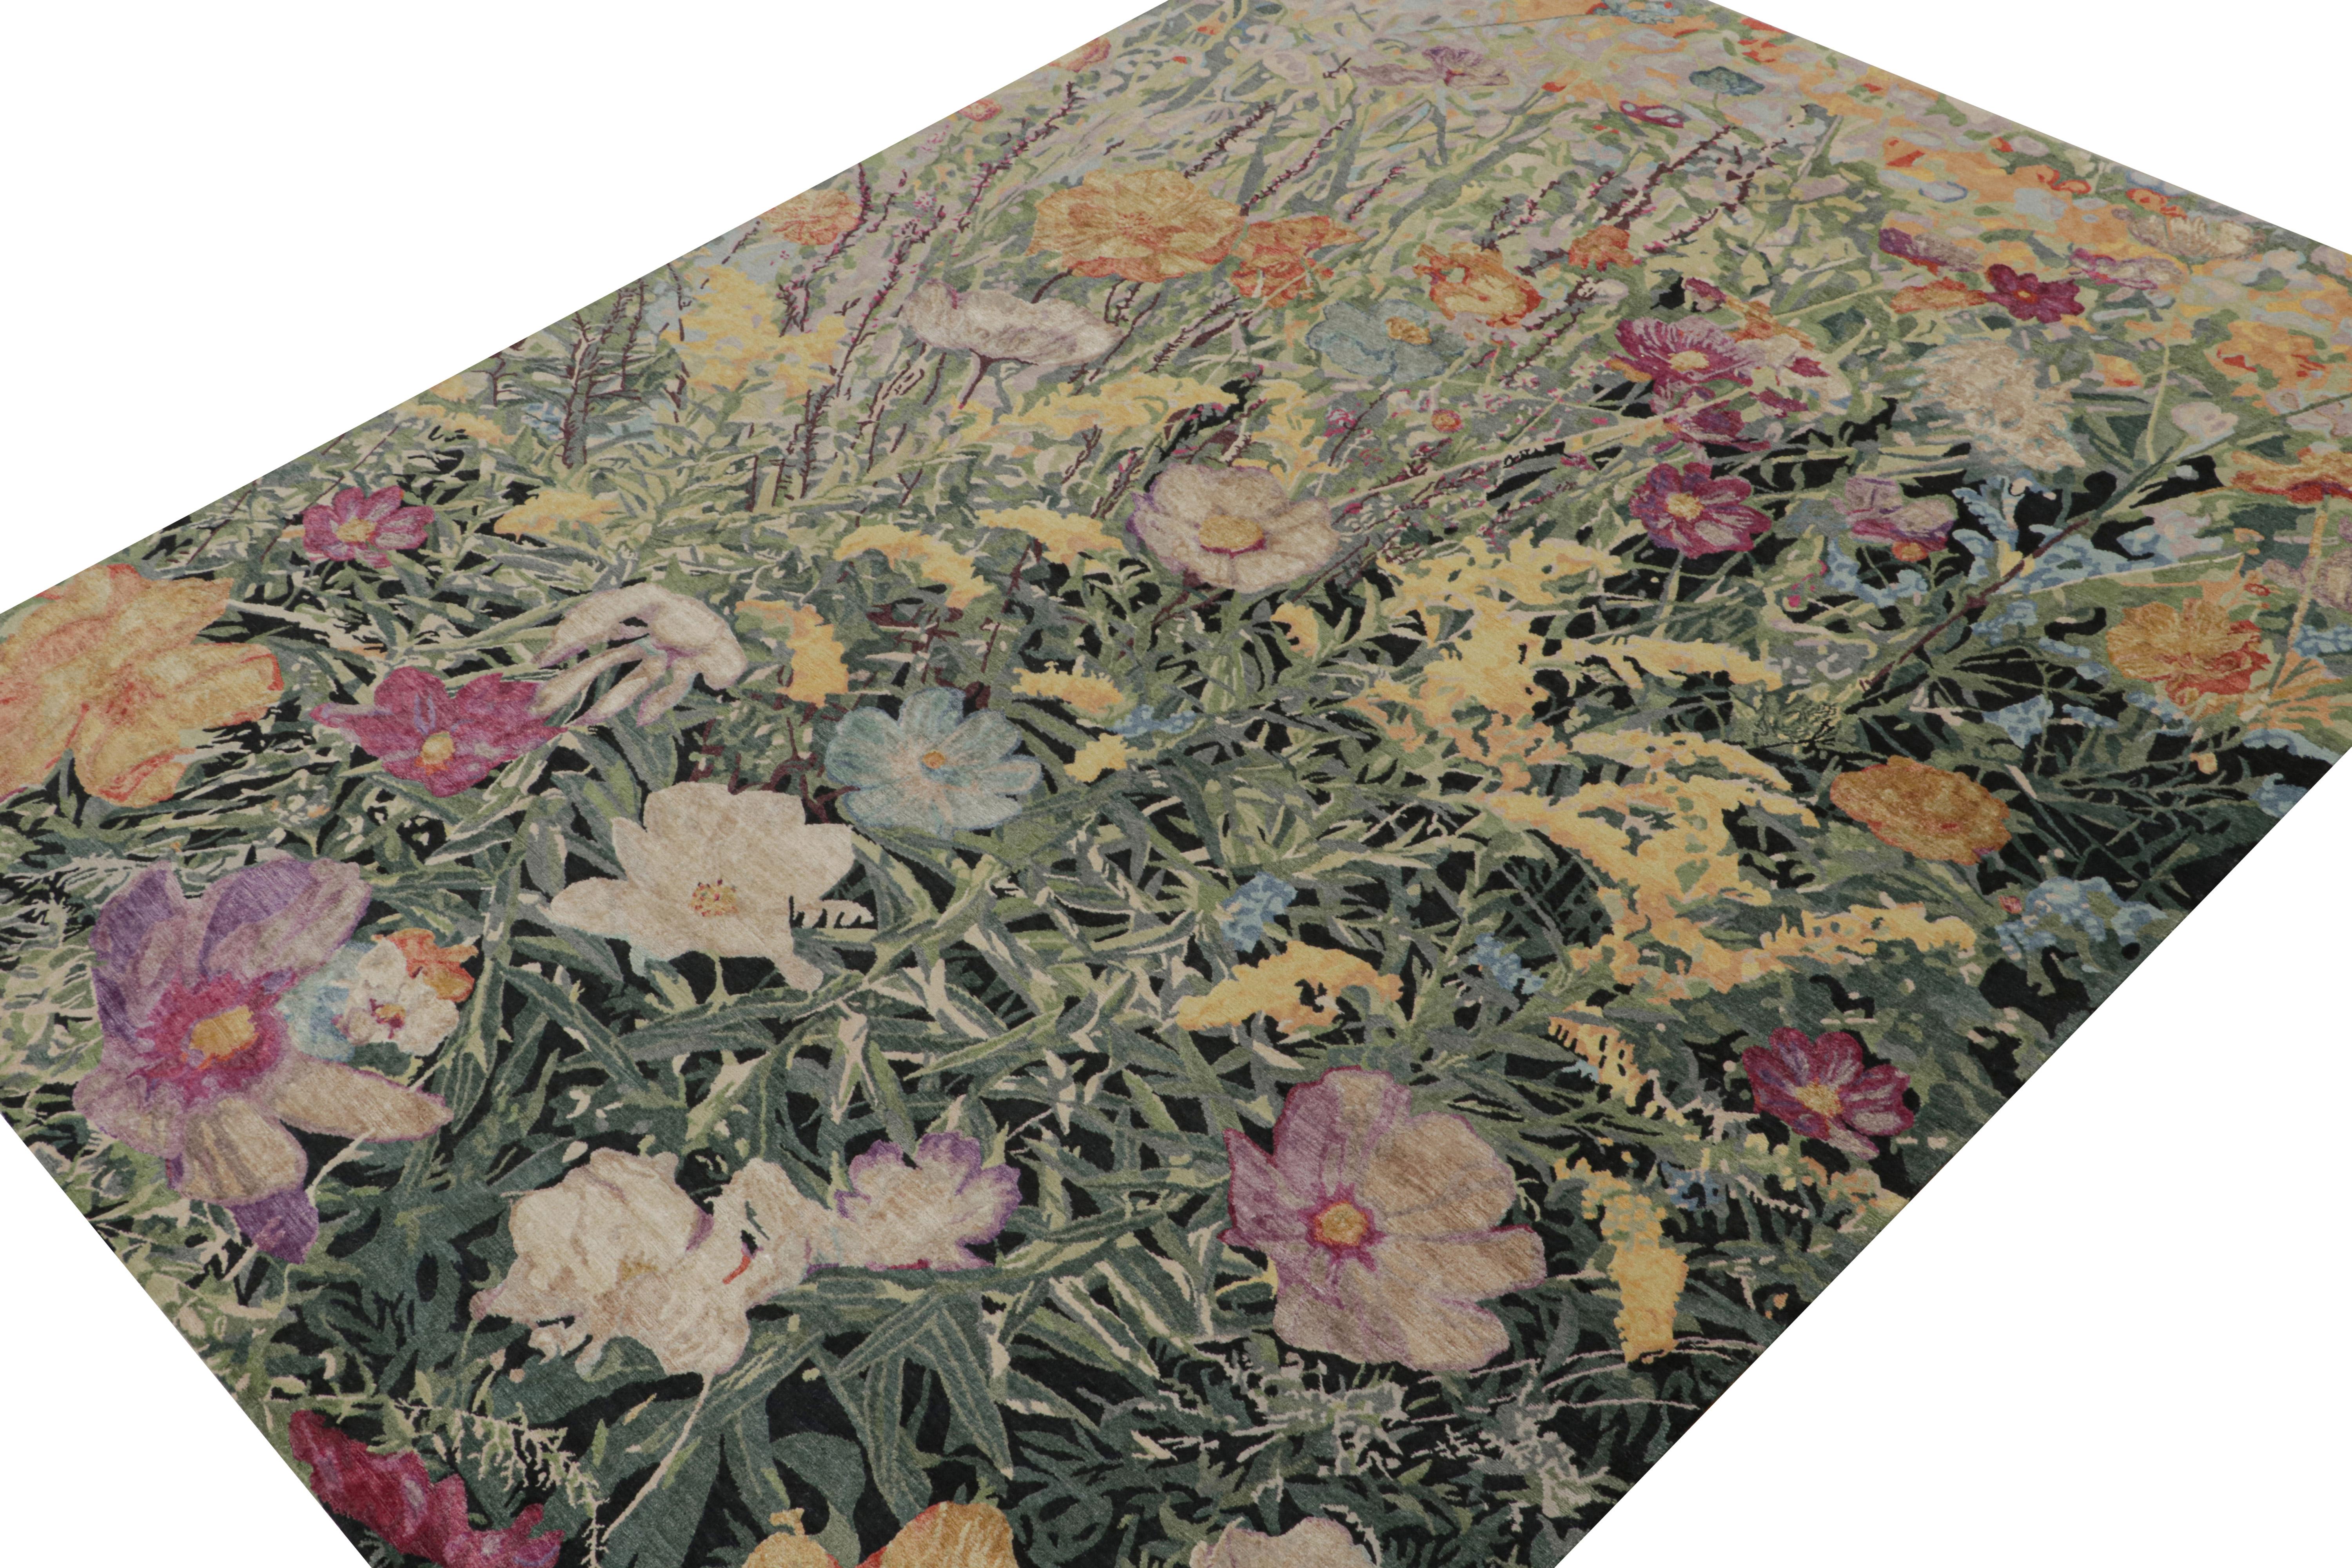 This contemporary 9x12 botanical rug is a new addition to Rug & Kilim’s Modern Collection—hand-knotted in wool and silk. 

On the Design:

The rug features an all over floral pattern inspired by impressionist paintings. The density of design and